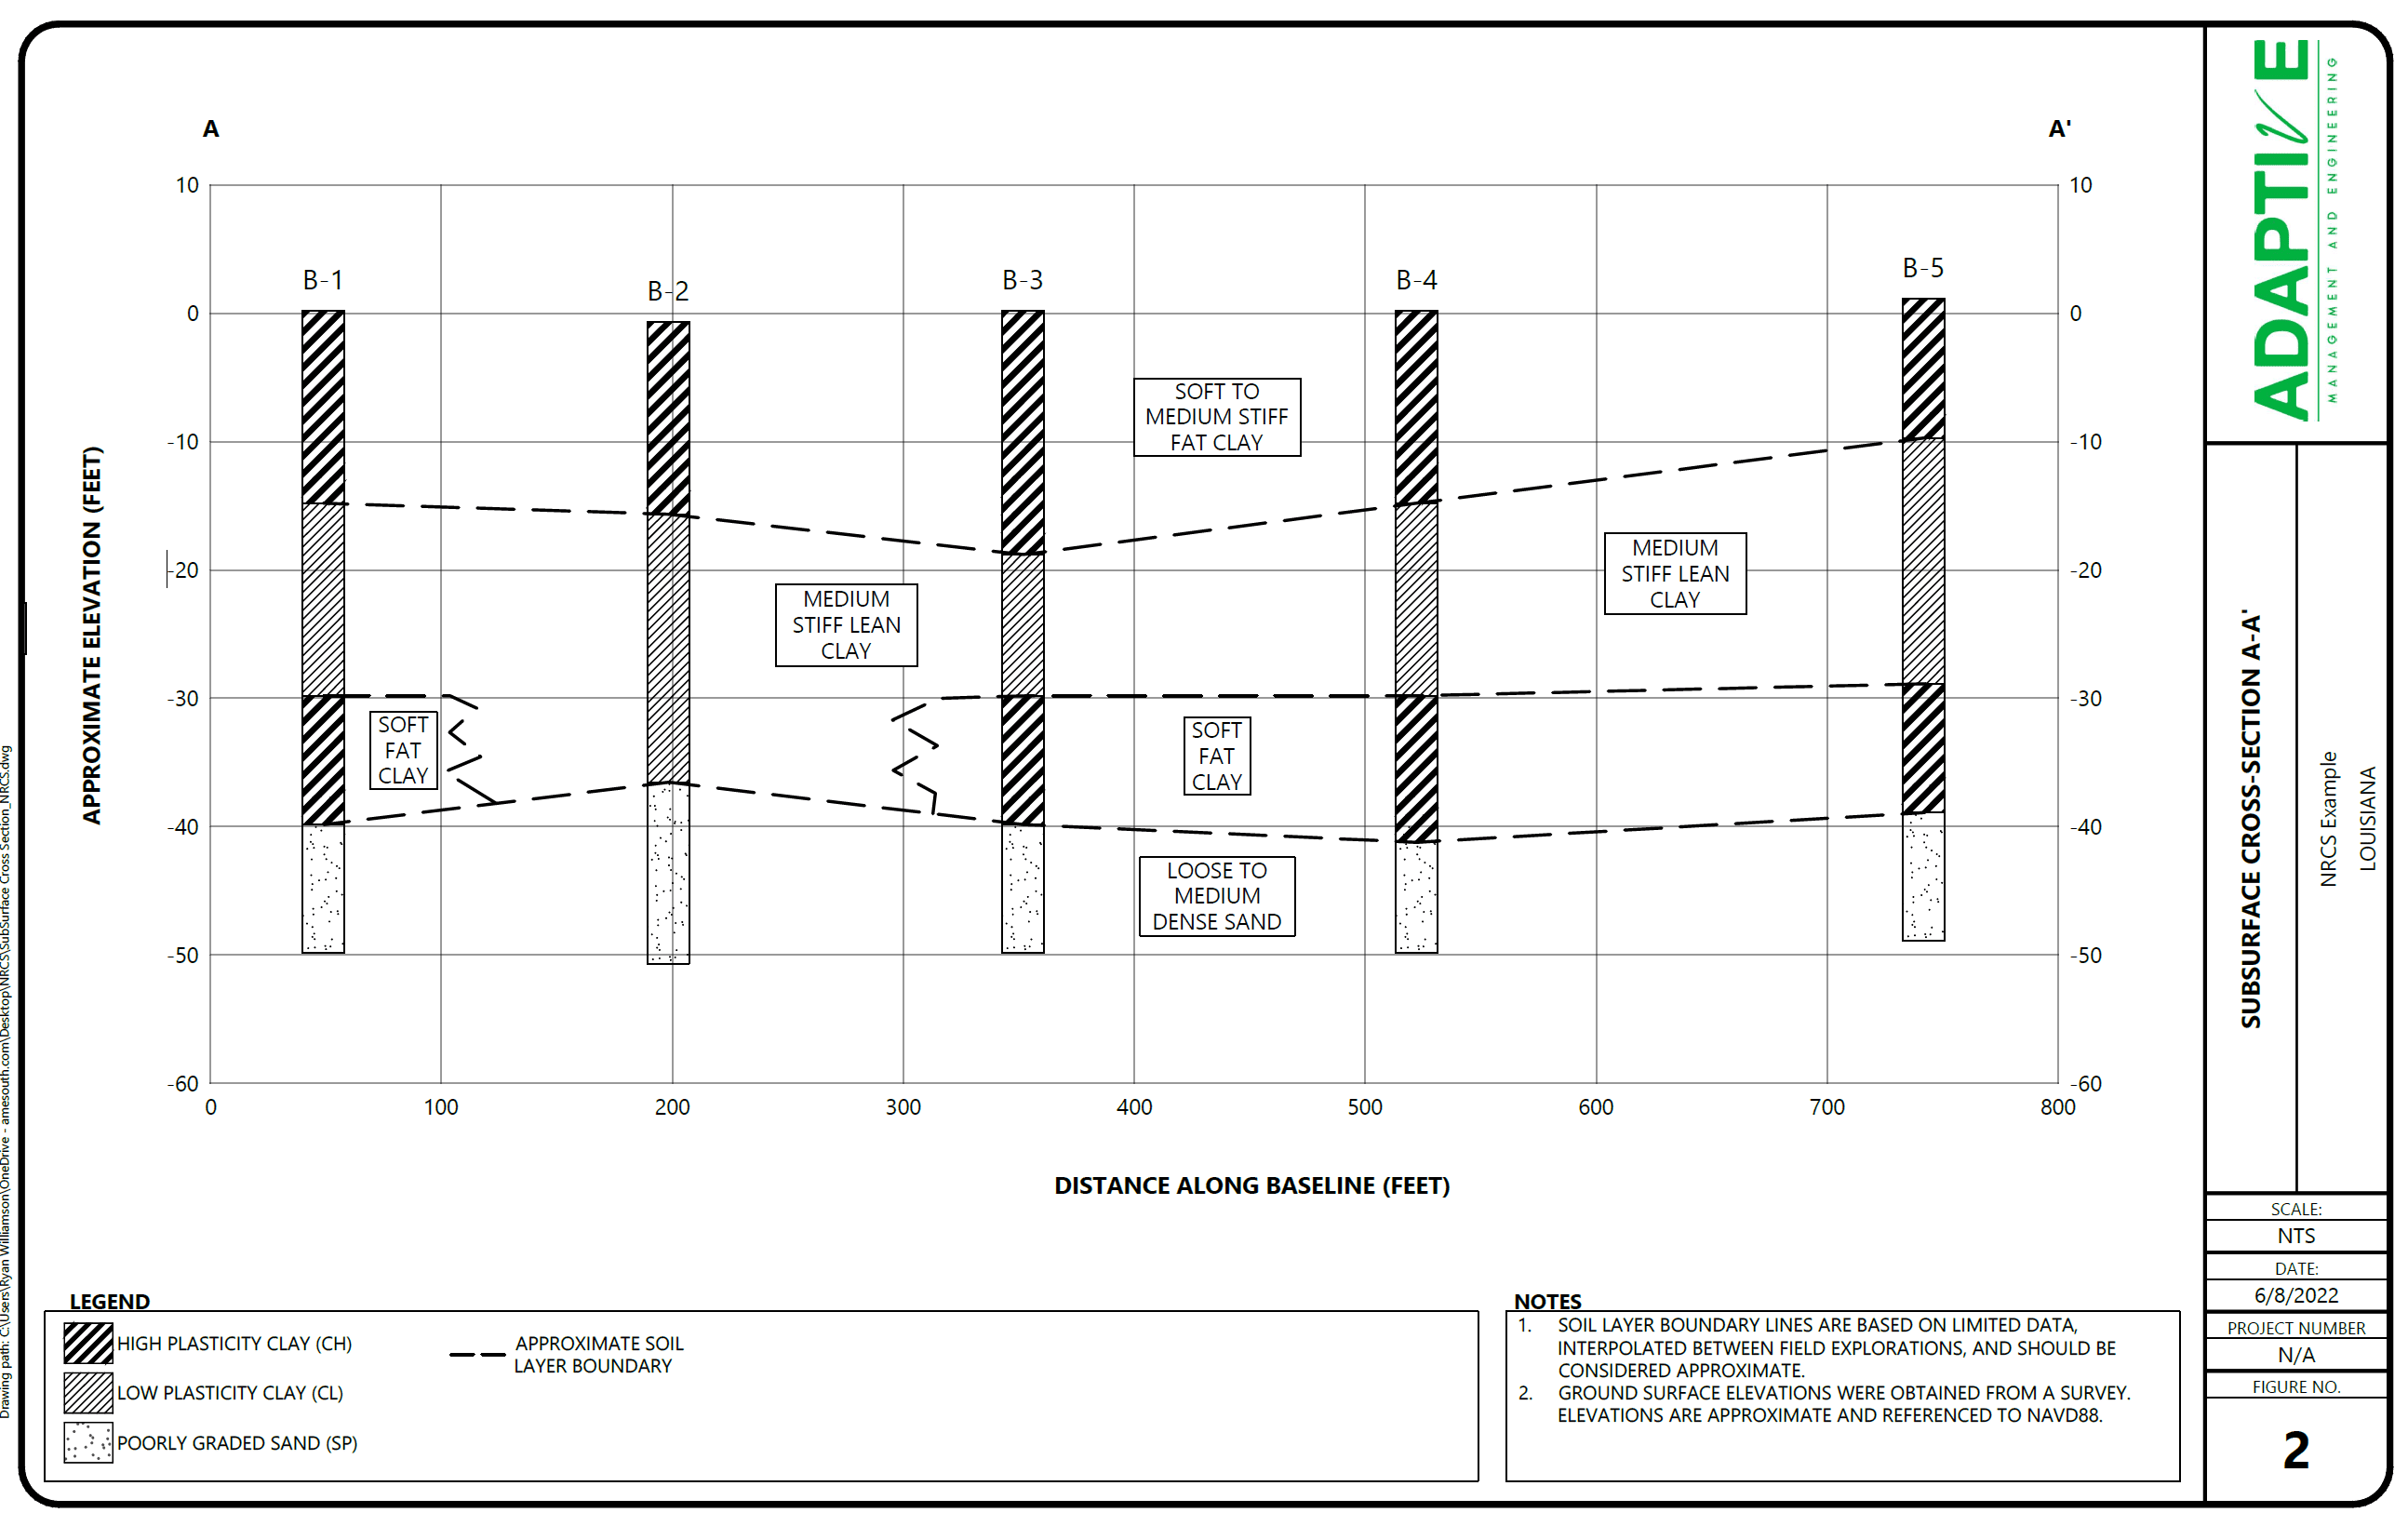 4. Geotechnical Cross Section